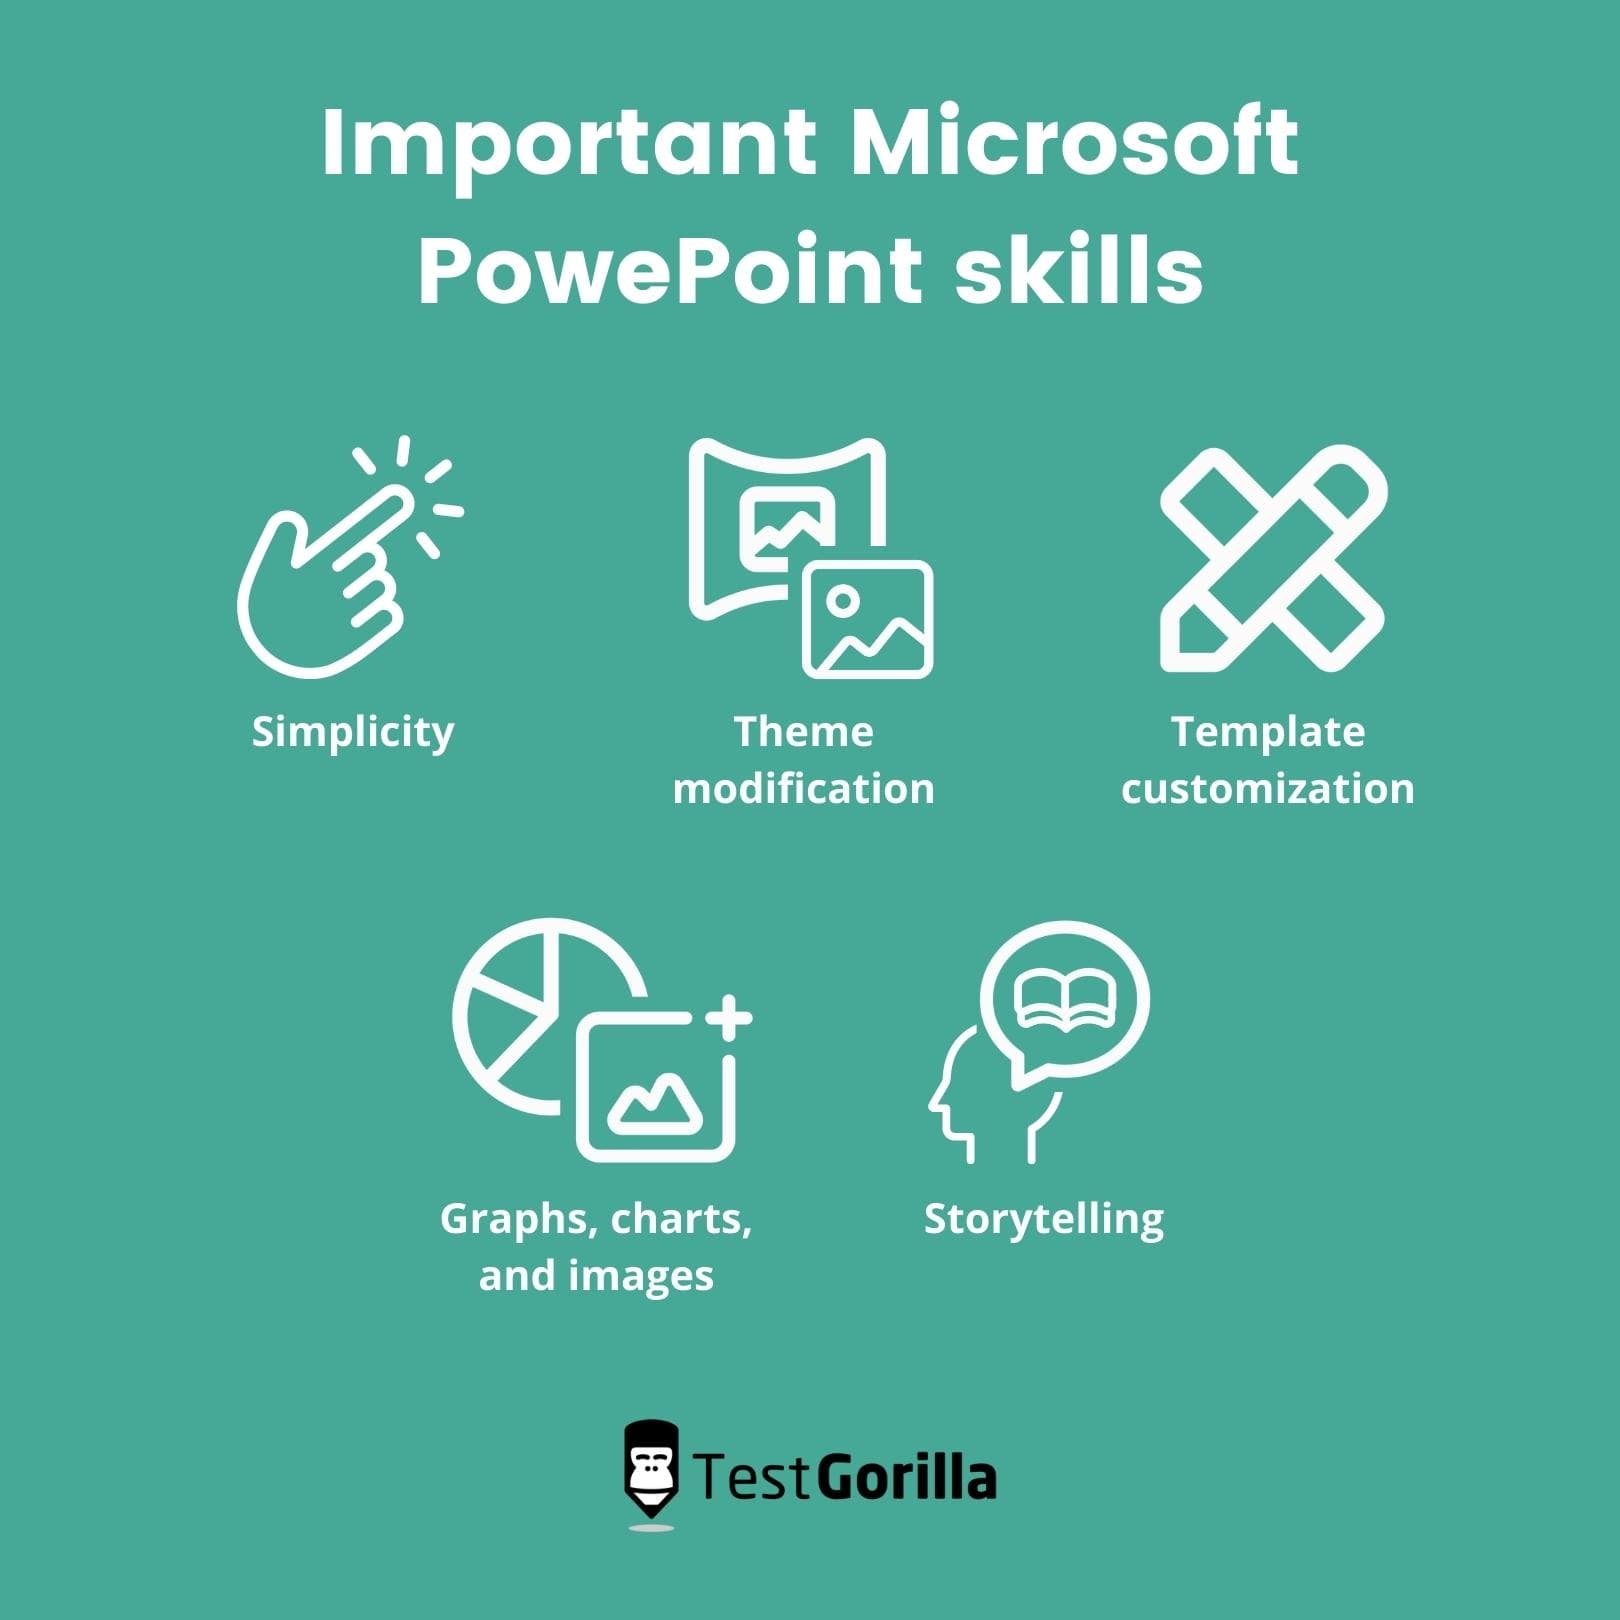 image showing important Microsoft PowerPoint skills